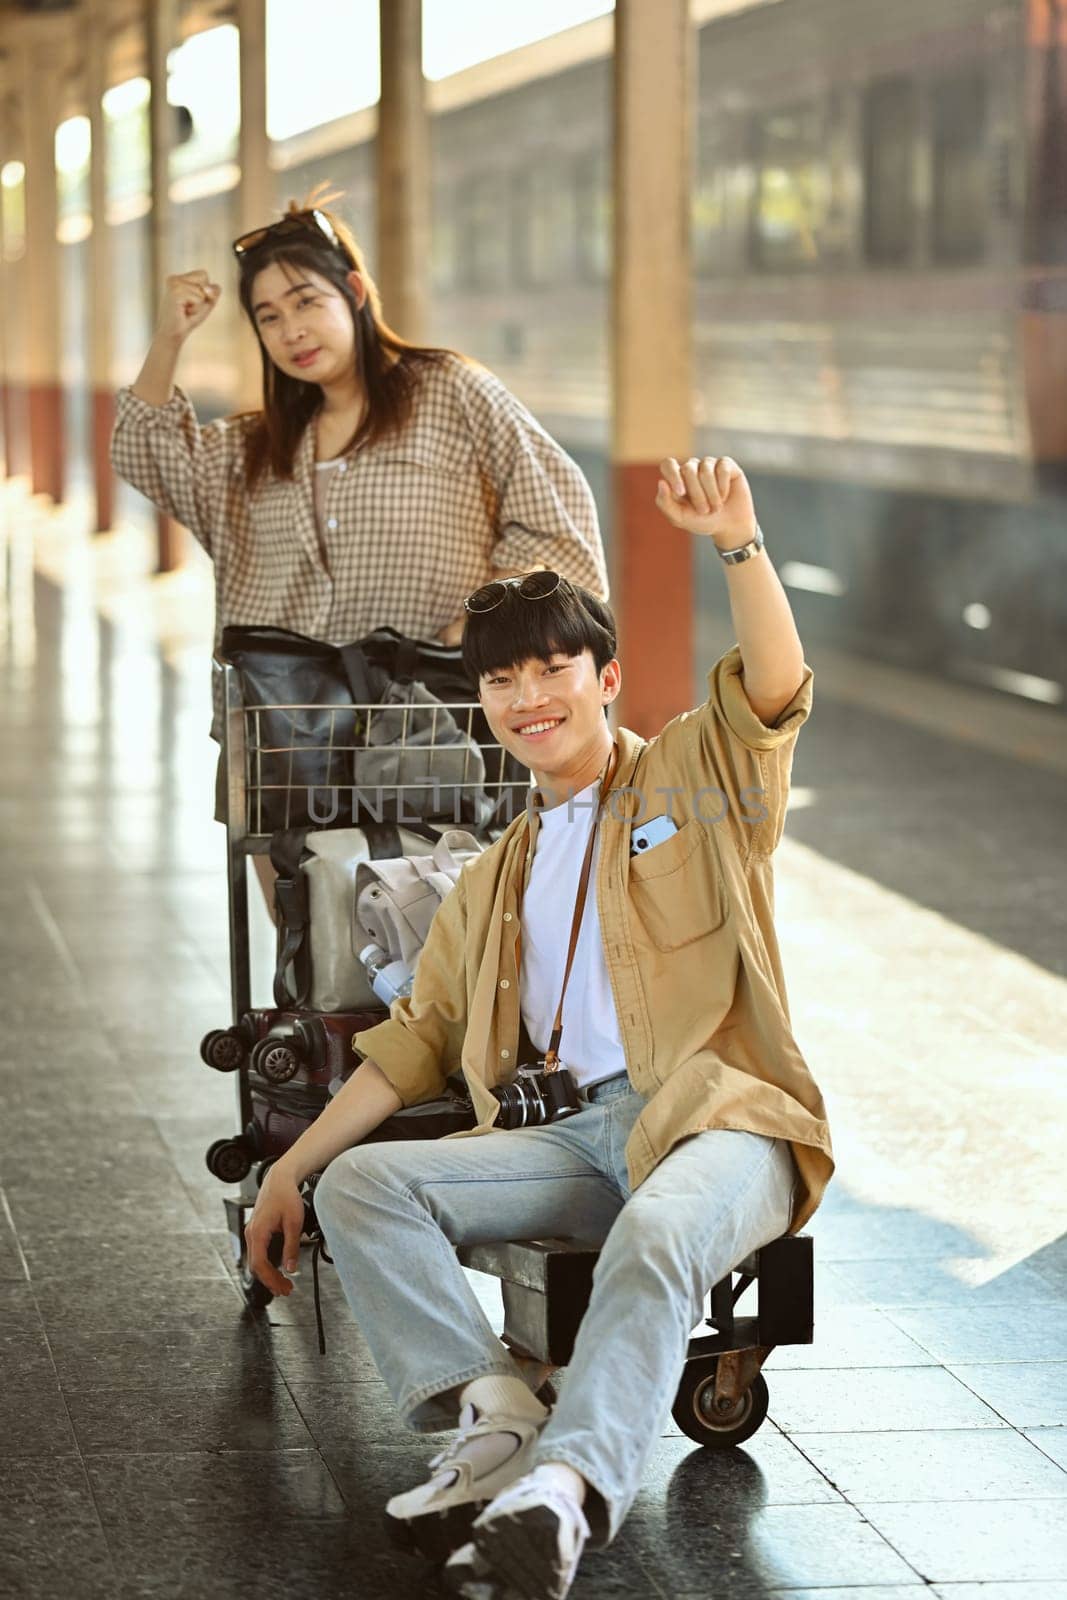 Happy young couple excited about their vacation trip standing in train station. Travel and lifestyle concept.